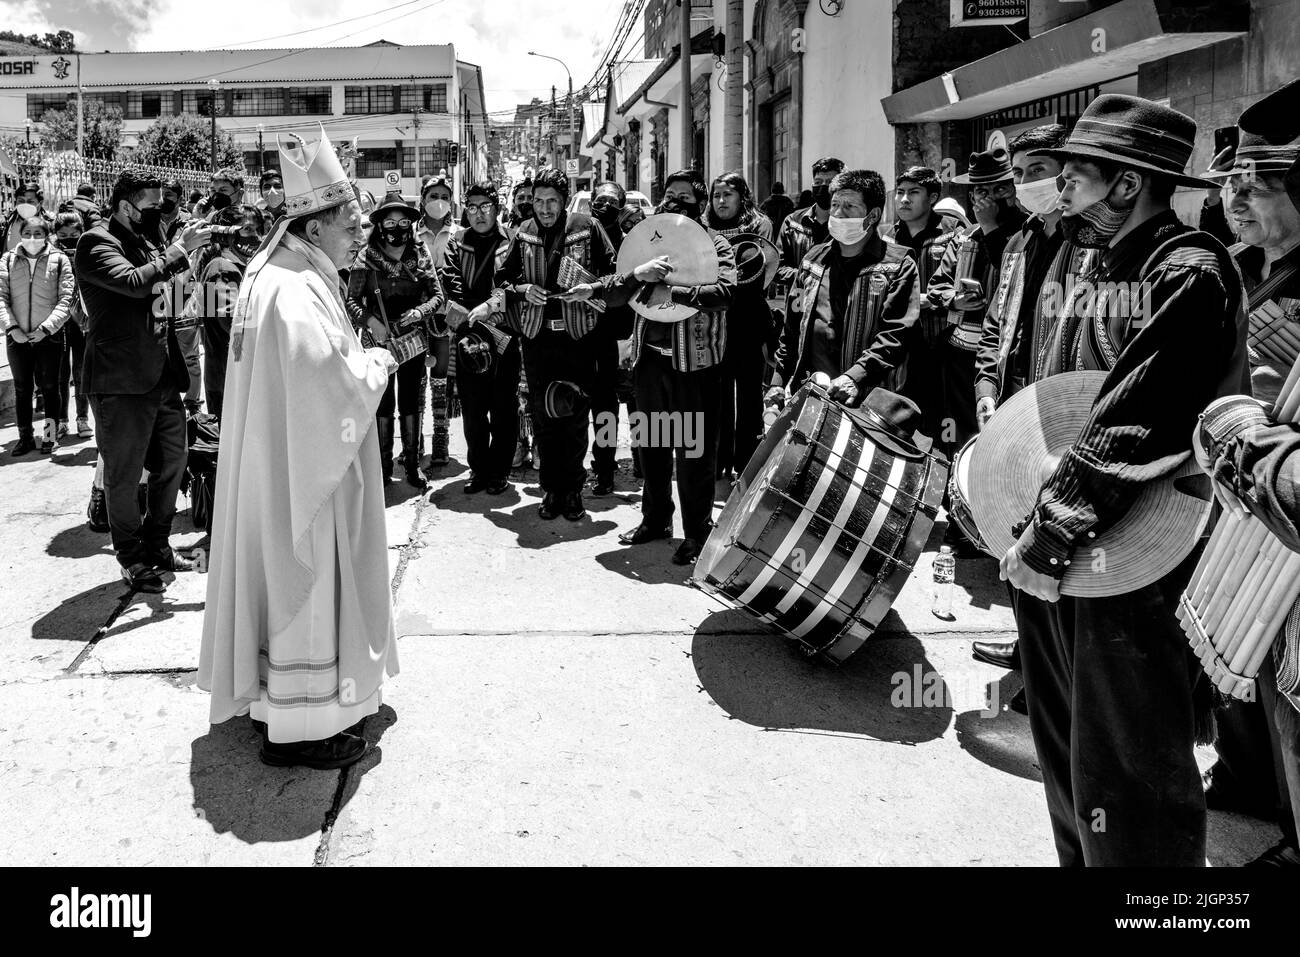 A Catholic Priest Blesses A Musical Band After An Outdoor Mass In The Plaza De Armas, Puno, Puno Province, Peru. Stock Photo